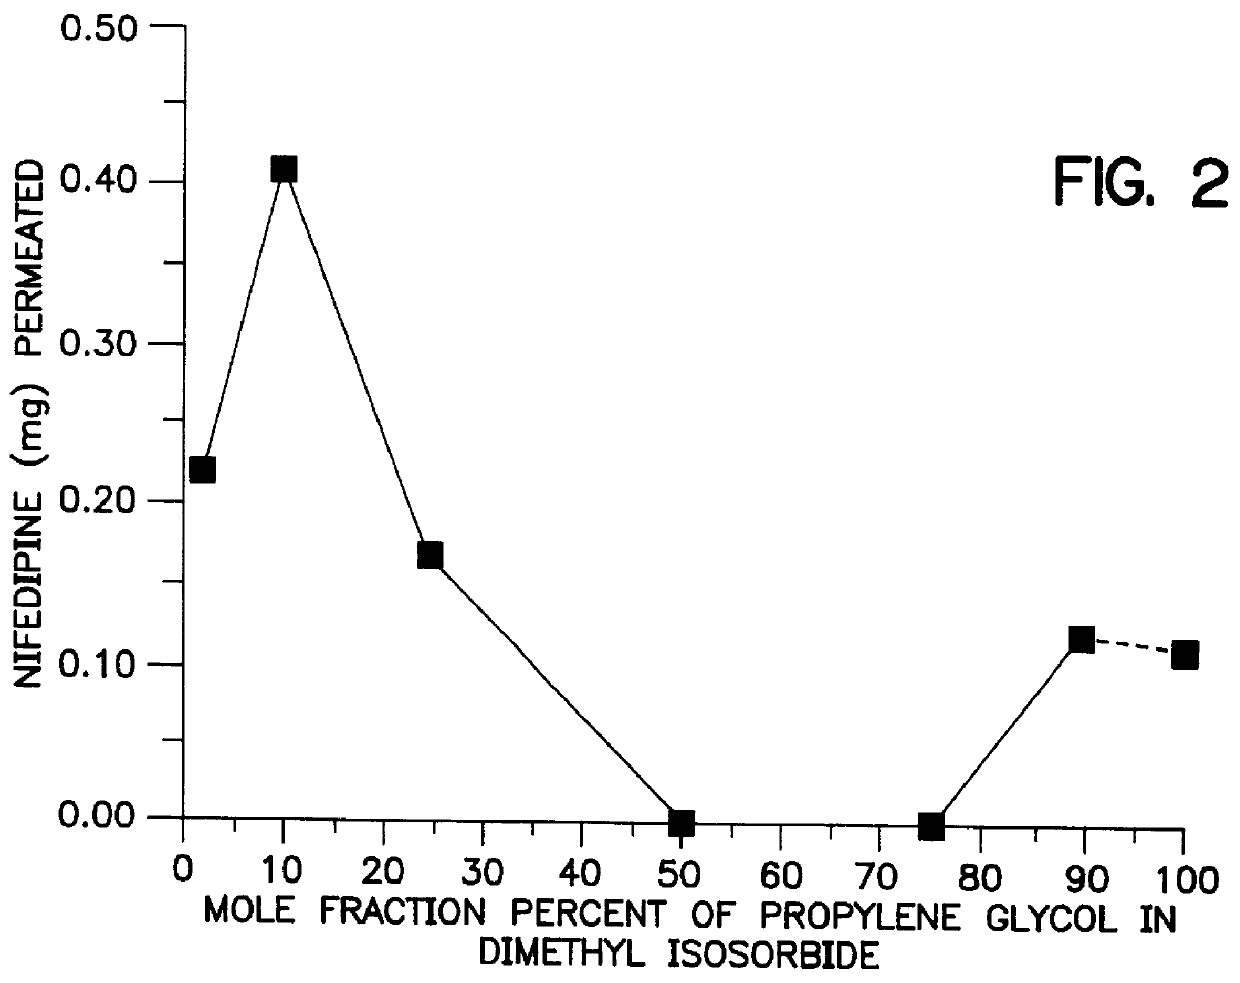 Transdermal delivery of calcium channel blockers, such as nifedipine